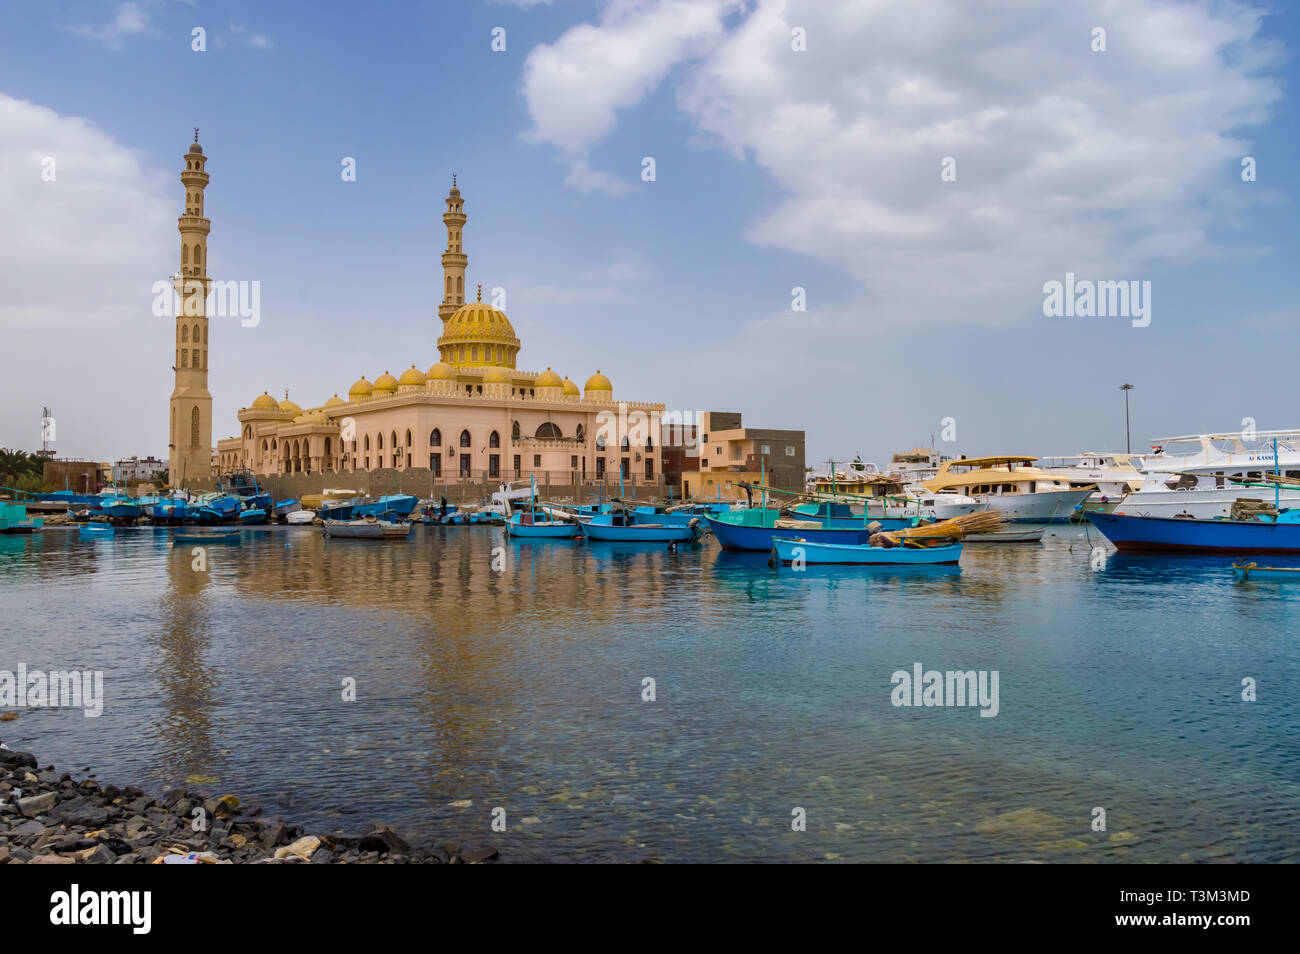 View of the Al Mina Masjid Mosque and its minarets in the city of hurghada from the old marina with its fishing boats Stock Photo